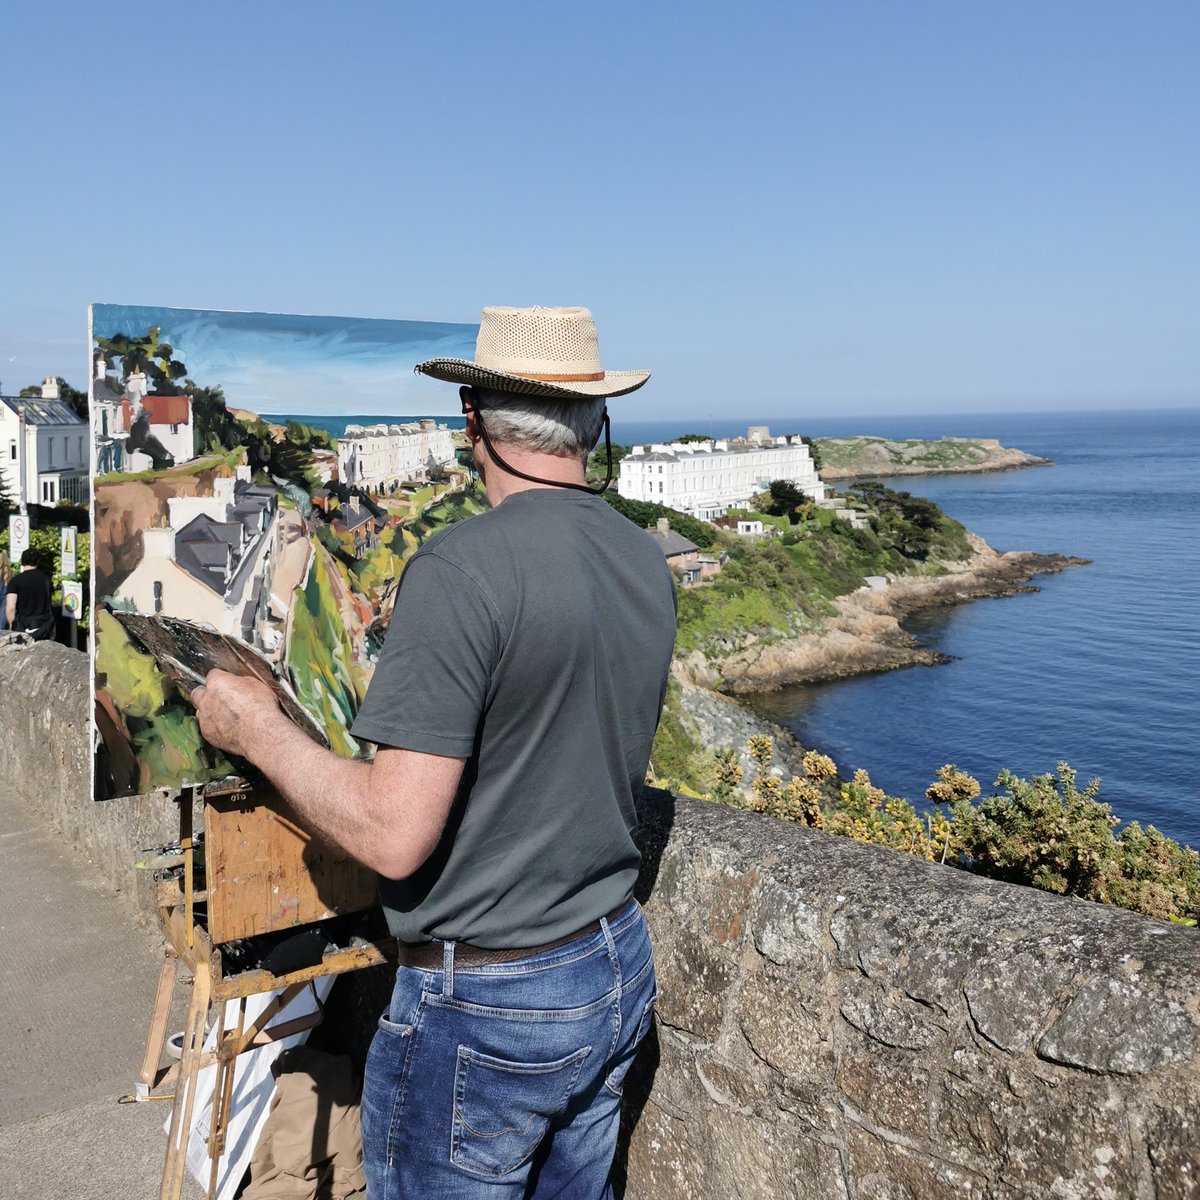 Dalkey Book Festival @dalkeybookfest just kicked off this afternoon giving yet another reason to visit this unique costal village over the #weekend. I’ll see you around! 👨‍🎨🎨
15-18 June 👉dalkeybookfestival.org

#Dalkey #GerardByrne #irishartist #DBF2023 @DalkeyF @artscouncil_ie